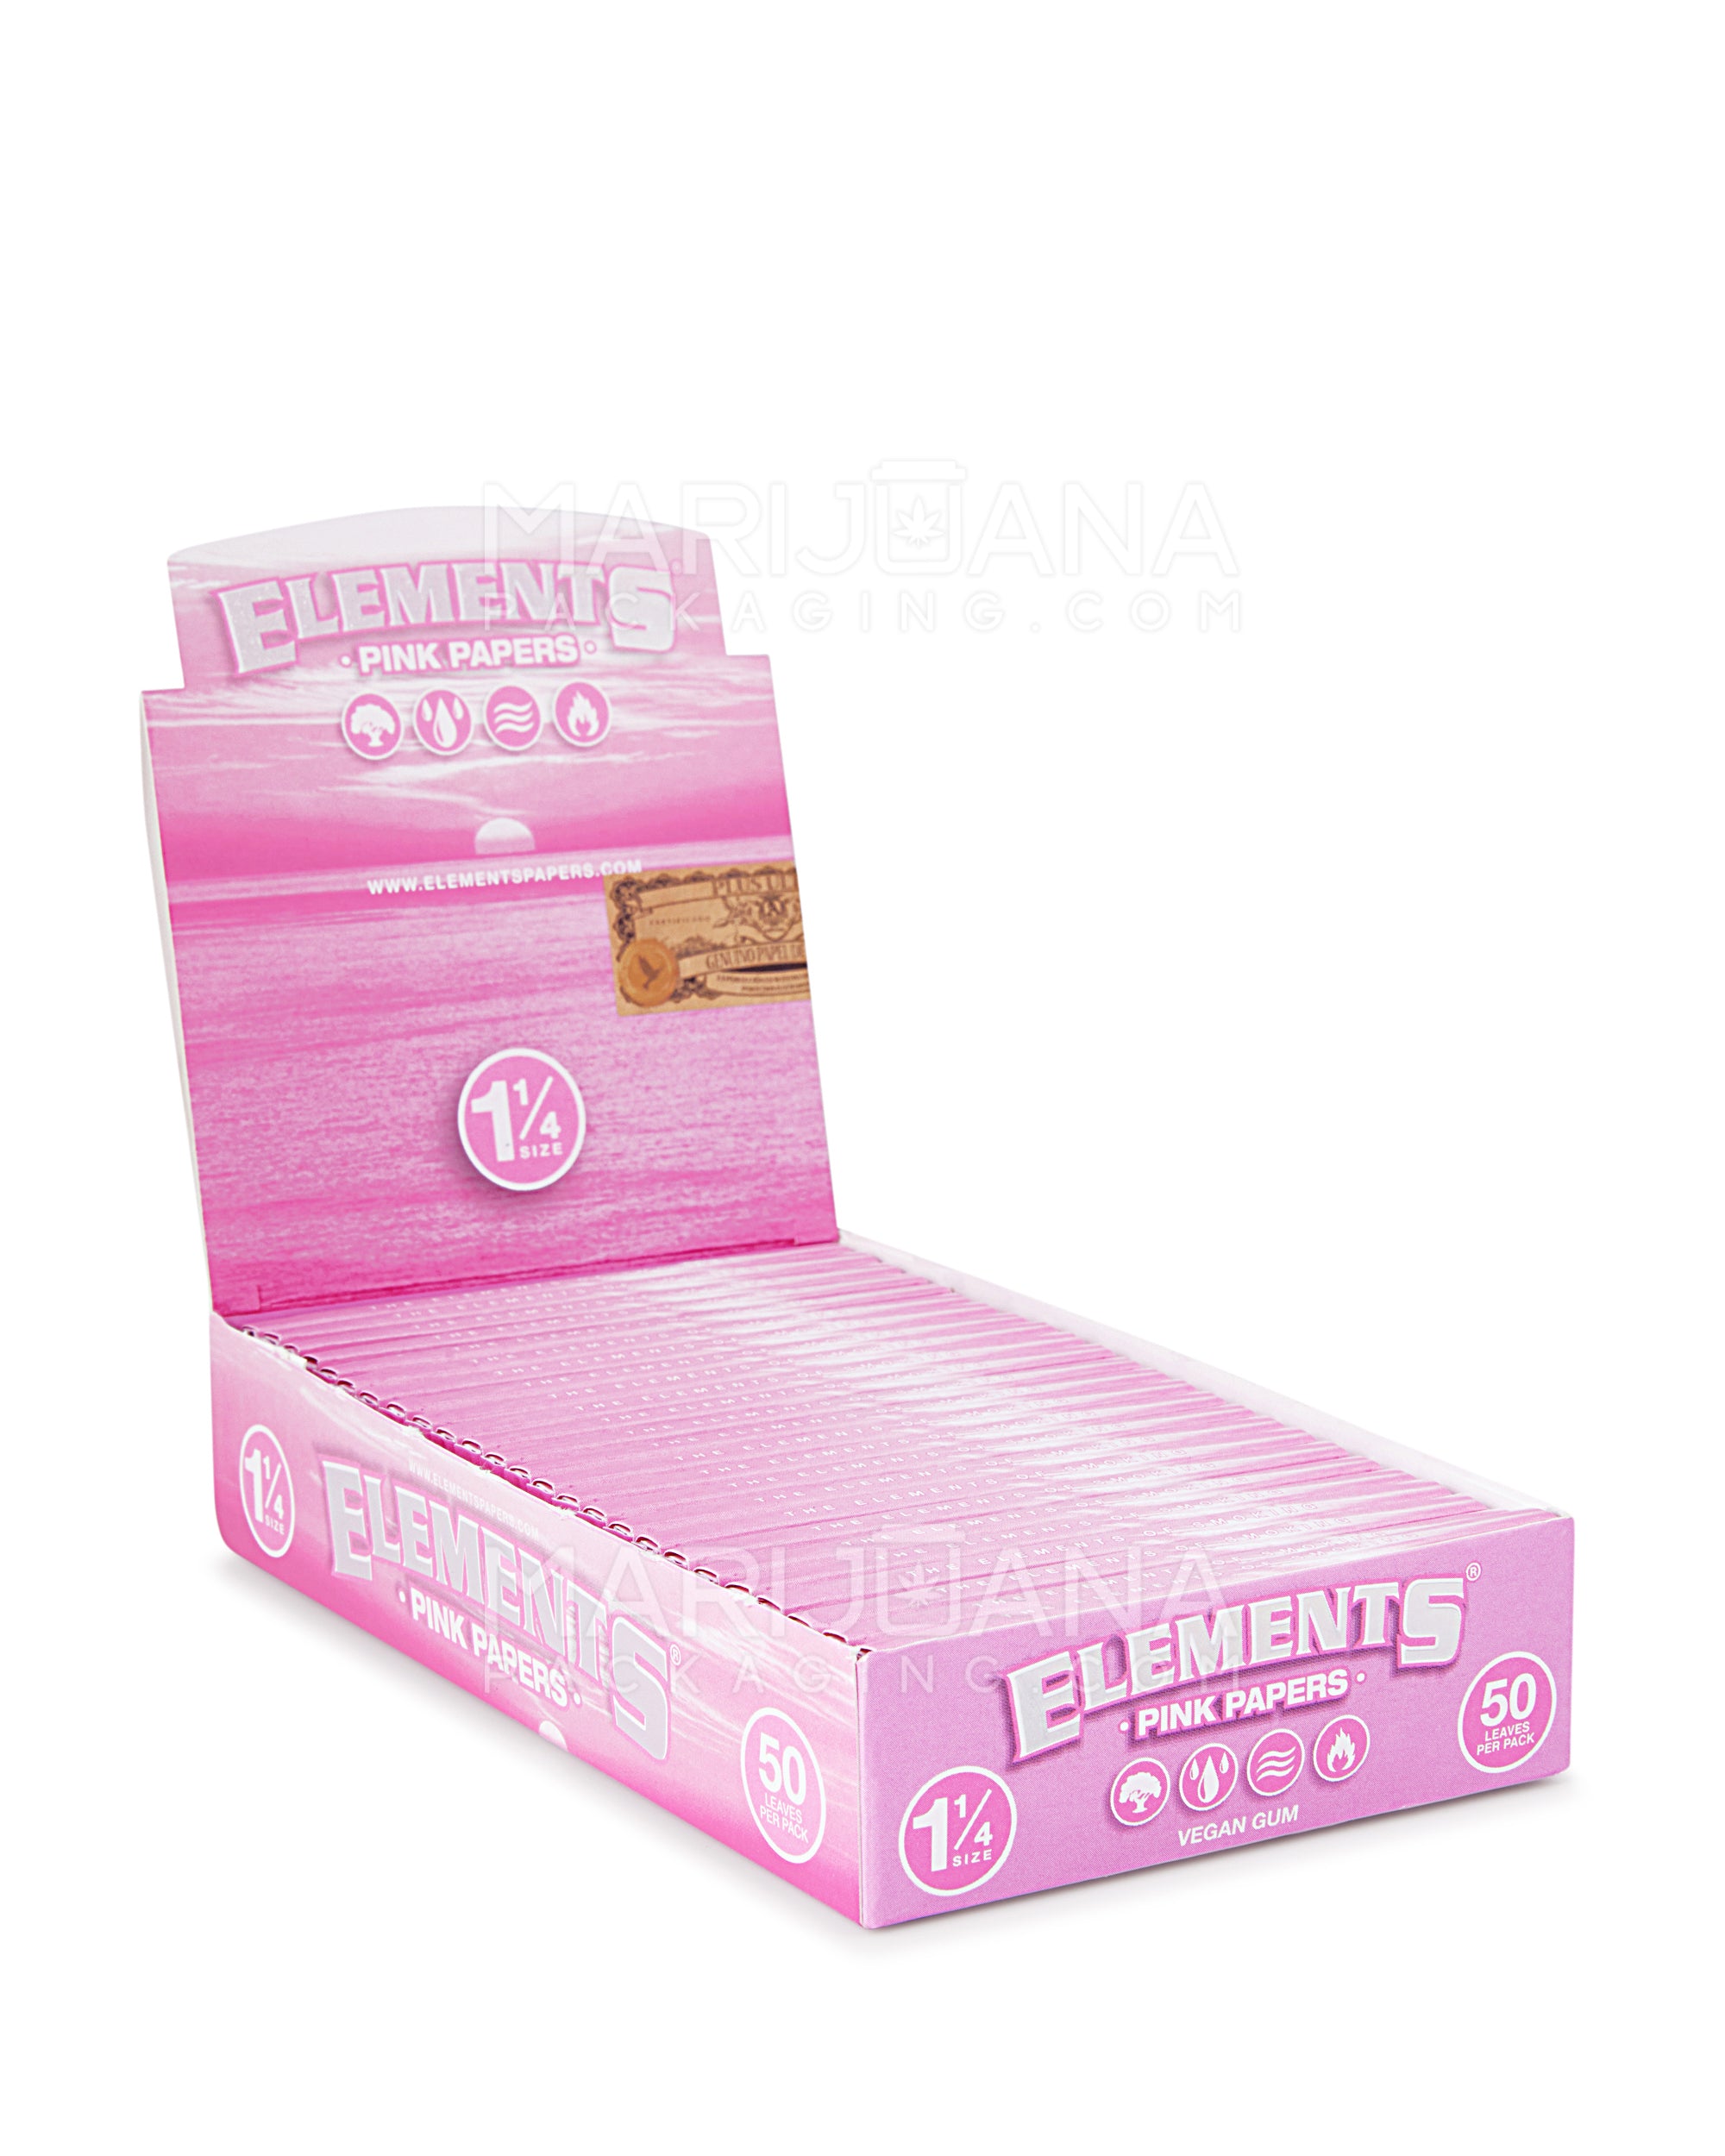 ELEMENTS | 'Retail Display' 1 1/4 Size Ultra Thin Rolling Papers | 83mm - Pink Rice Paper - 50 Count - 1